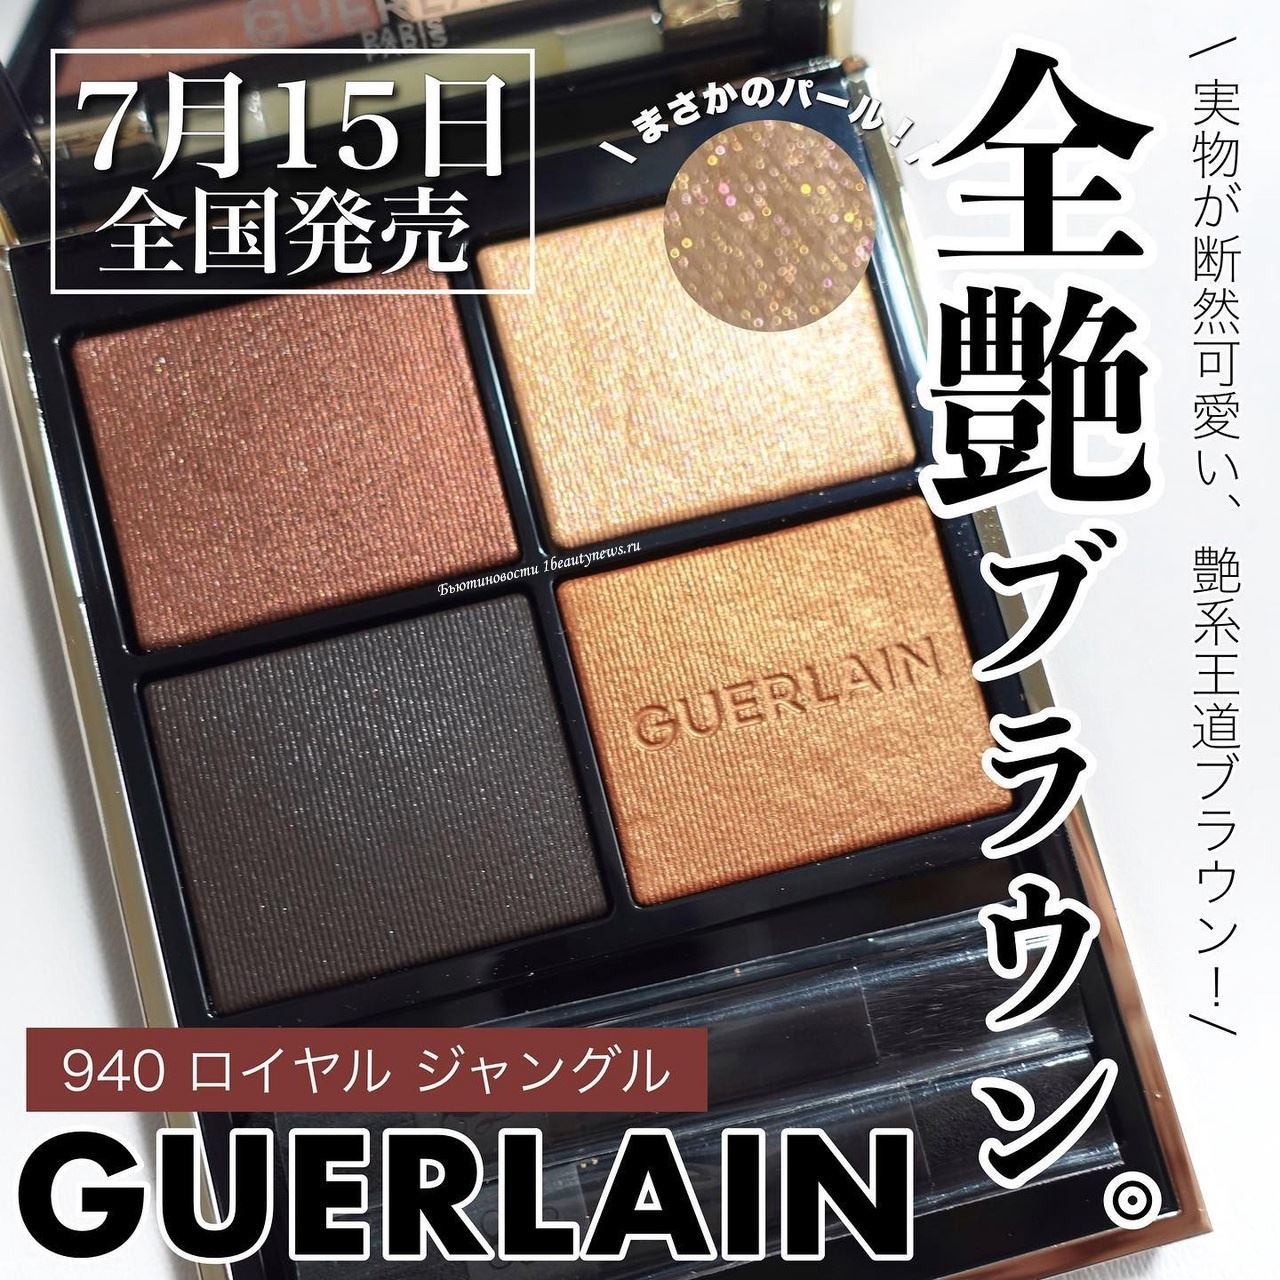 Guerlain Ombres G Eyeshadow Palette 2022 - 940 Royal Jungle - Swatches